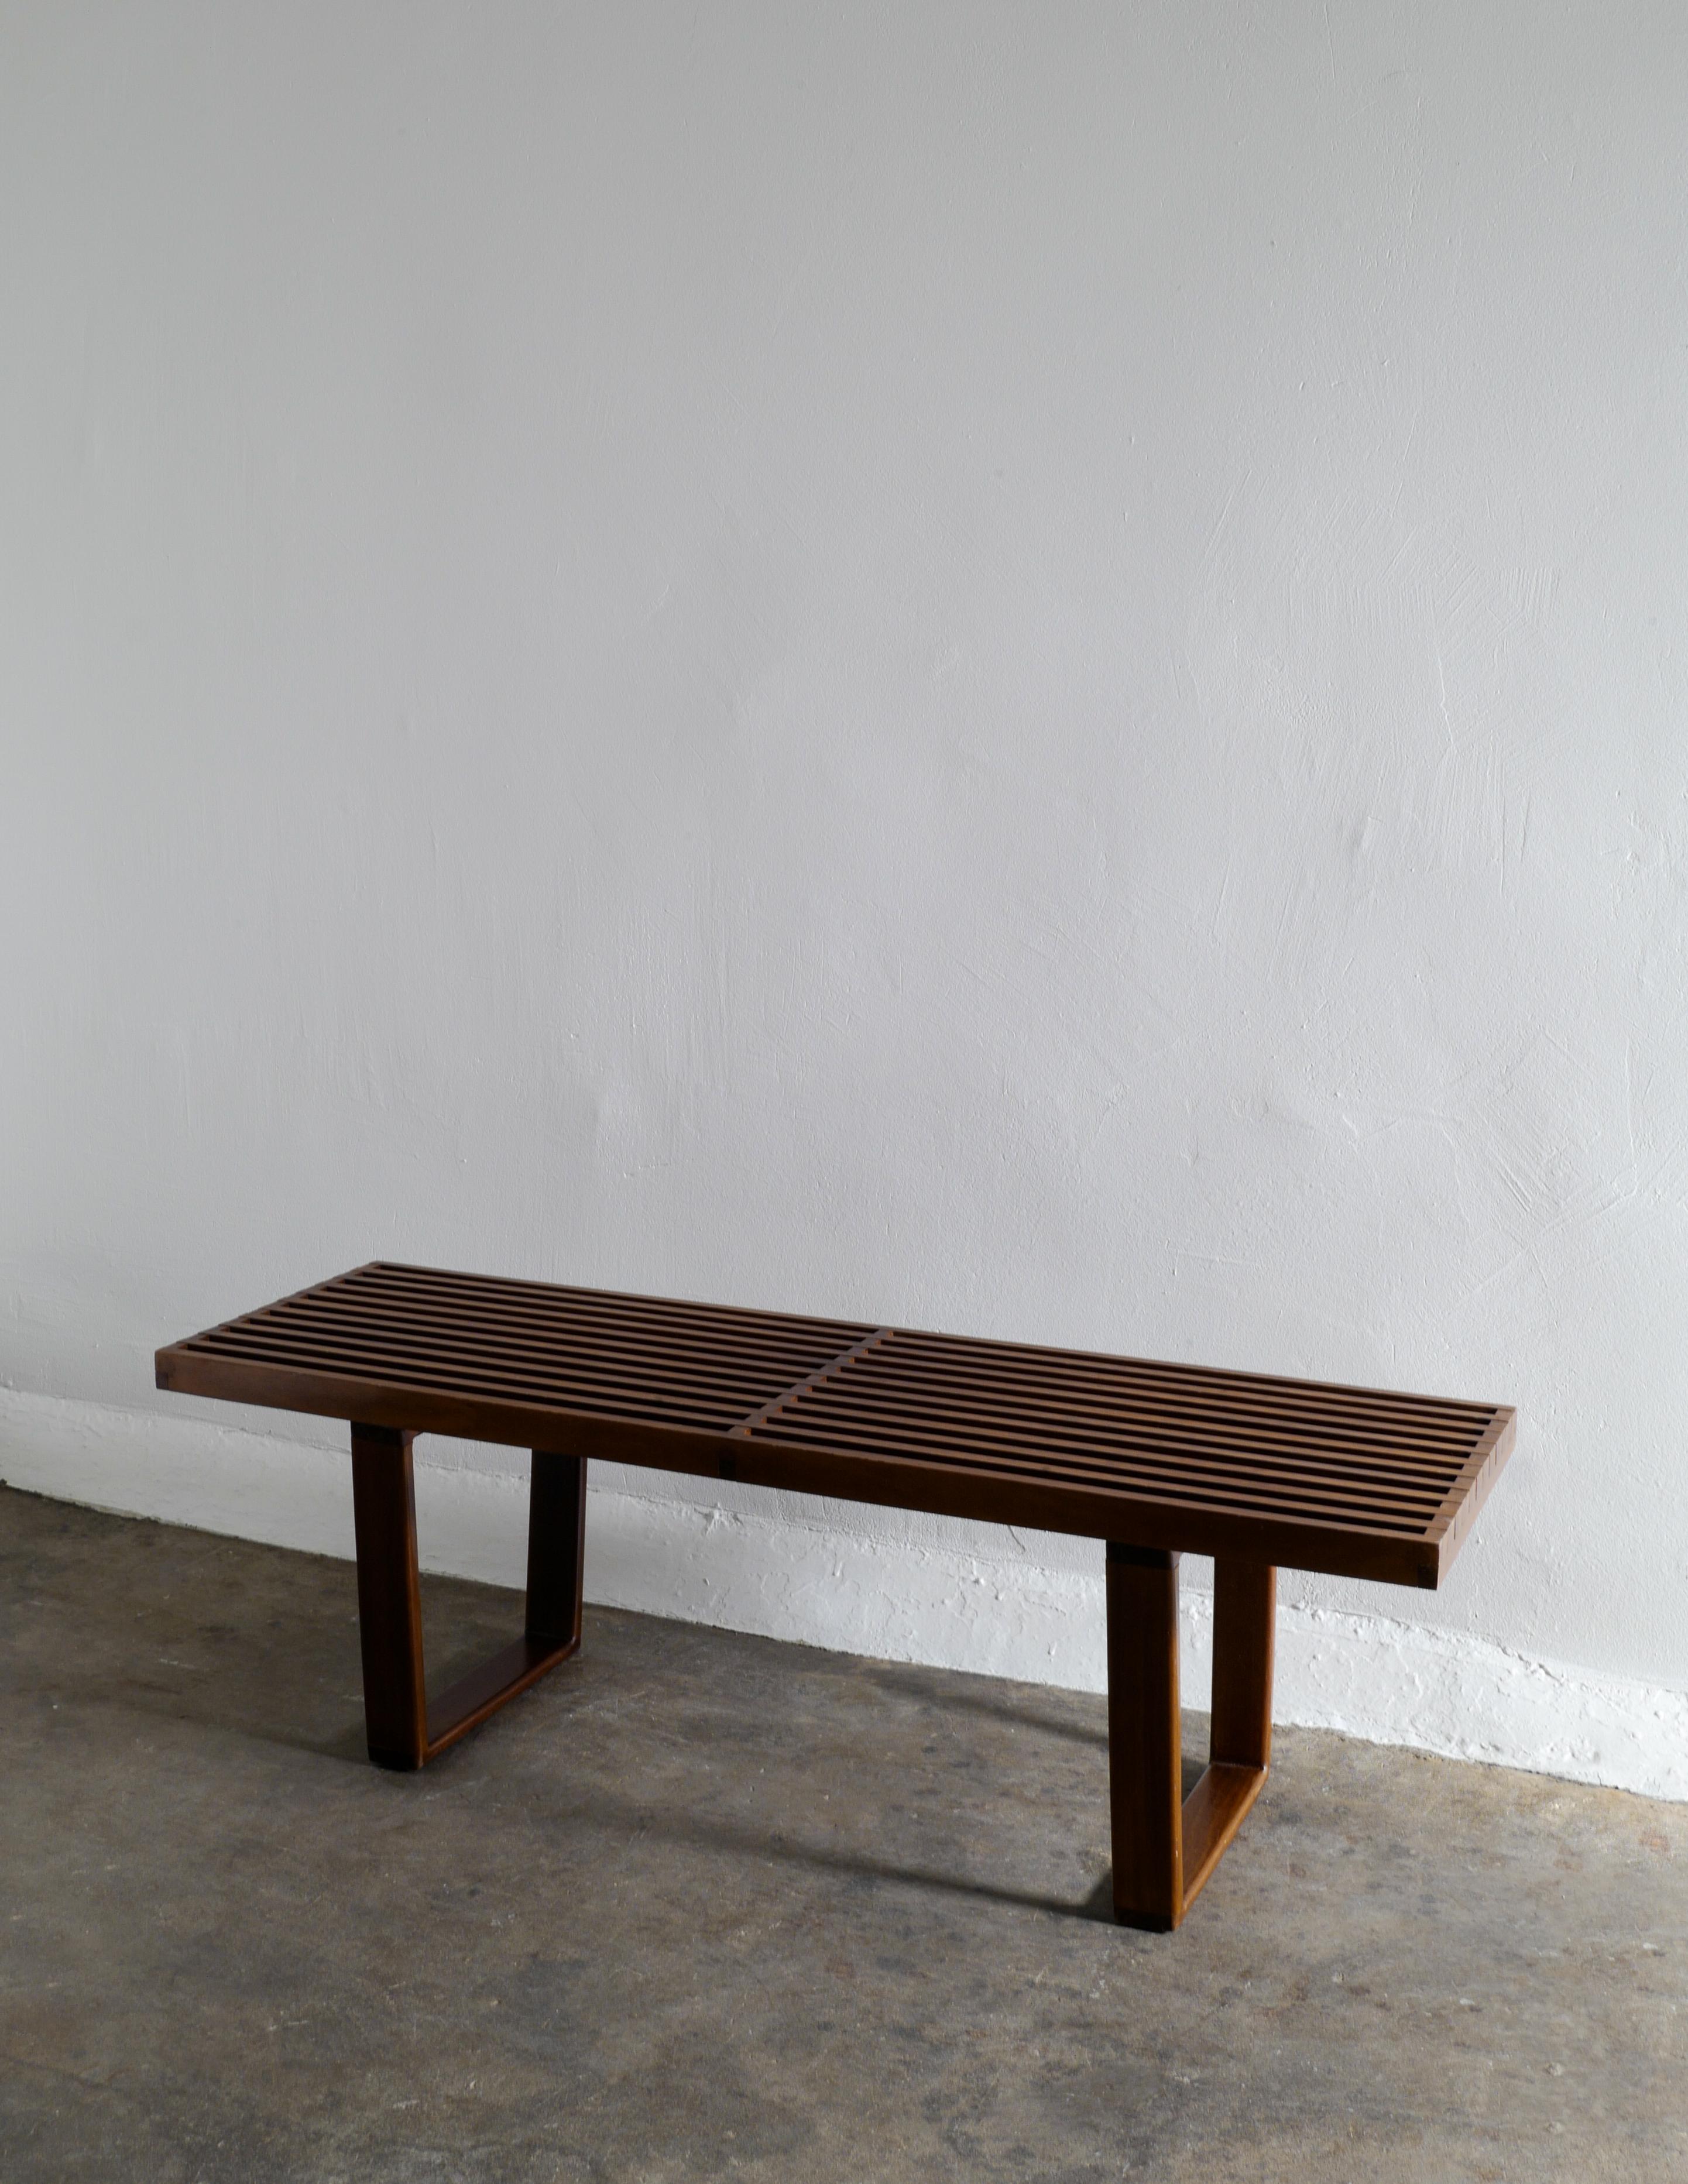 Mid-20th Century Wooden Bench in Walnut in style of George Nelson Produced in France, 1960s